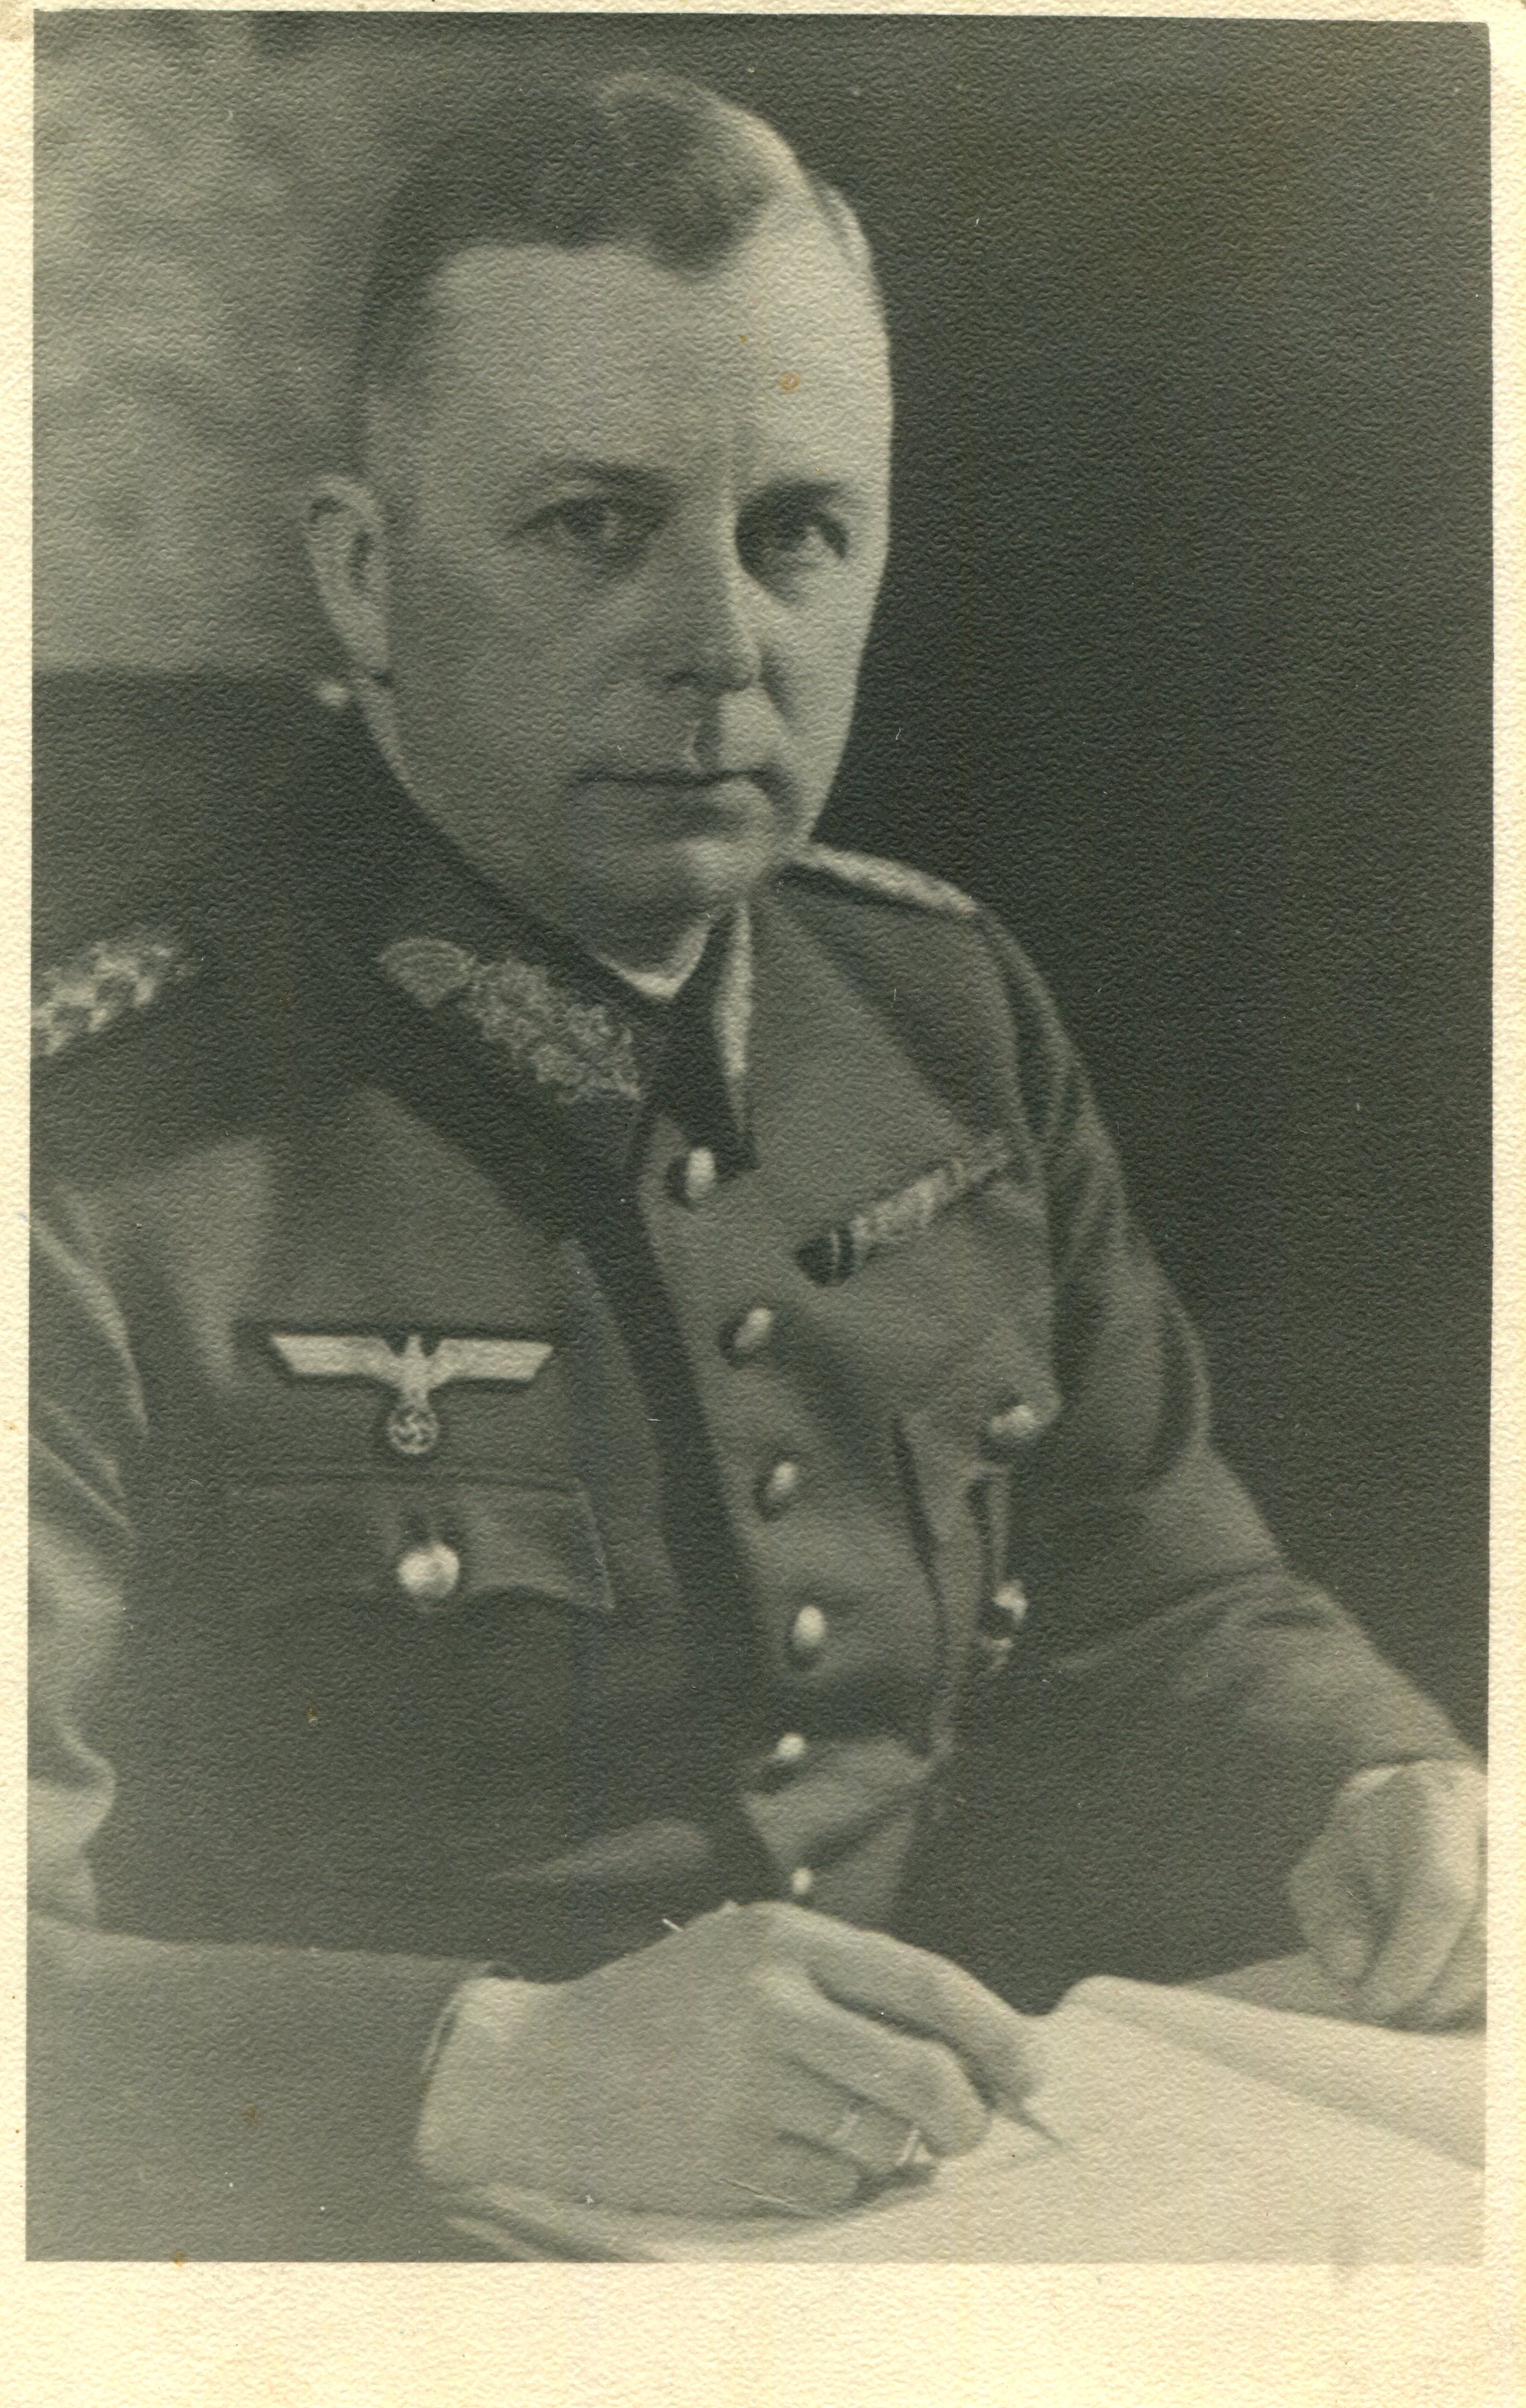 KEITEL BODEWIN: (1888-1953) German General of World War II who served as head of the Army Personnel - Image 6 of 7